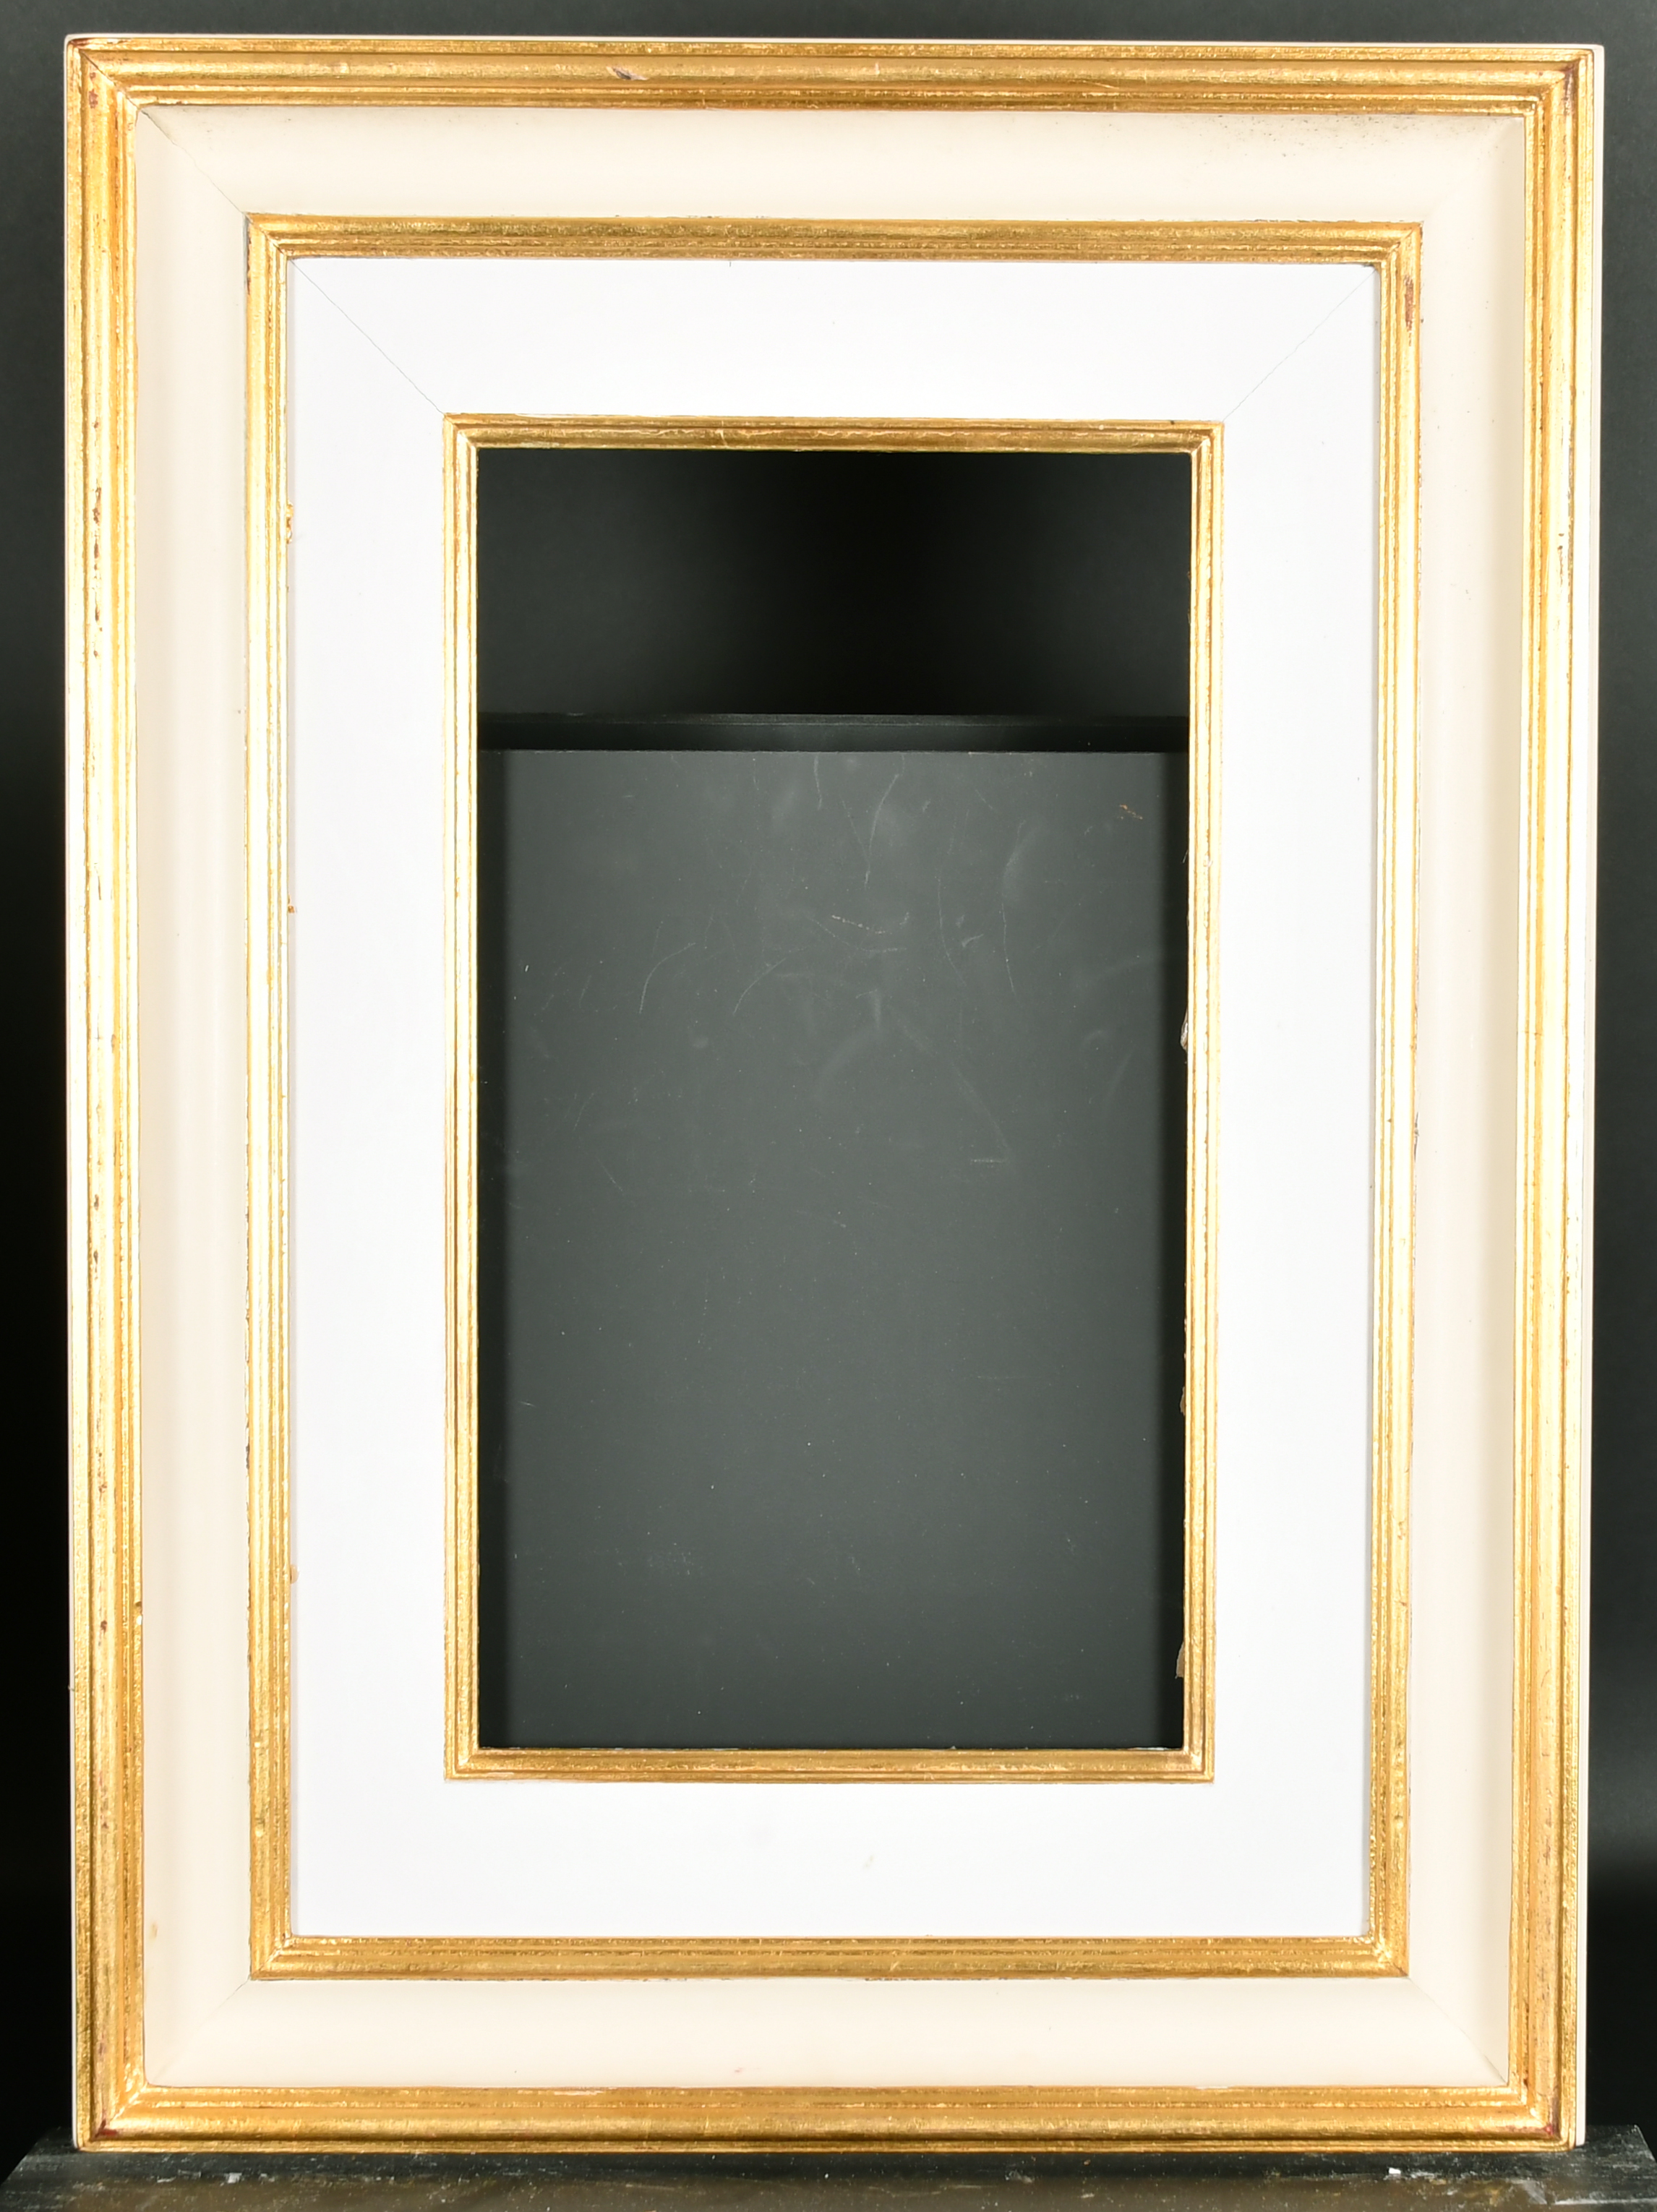 21st Century English School. A Gilt and White Painted Frame, rebate 18" x 10" (45.7 x 25.4cm) - Image 2 of 3